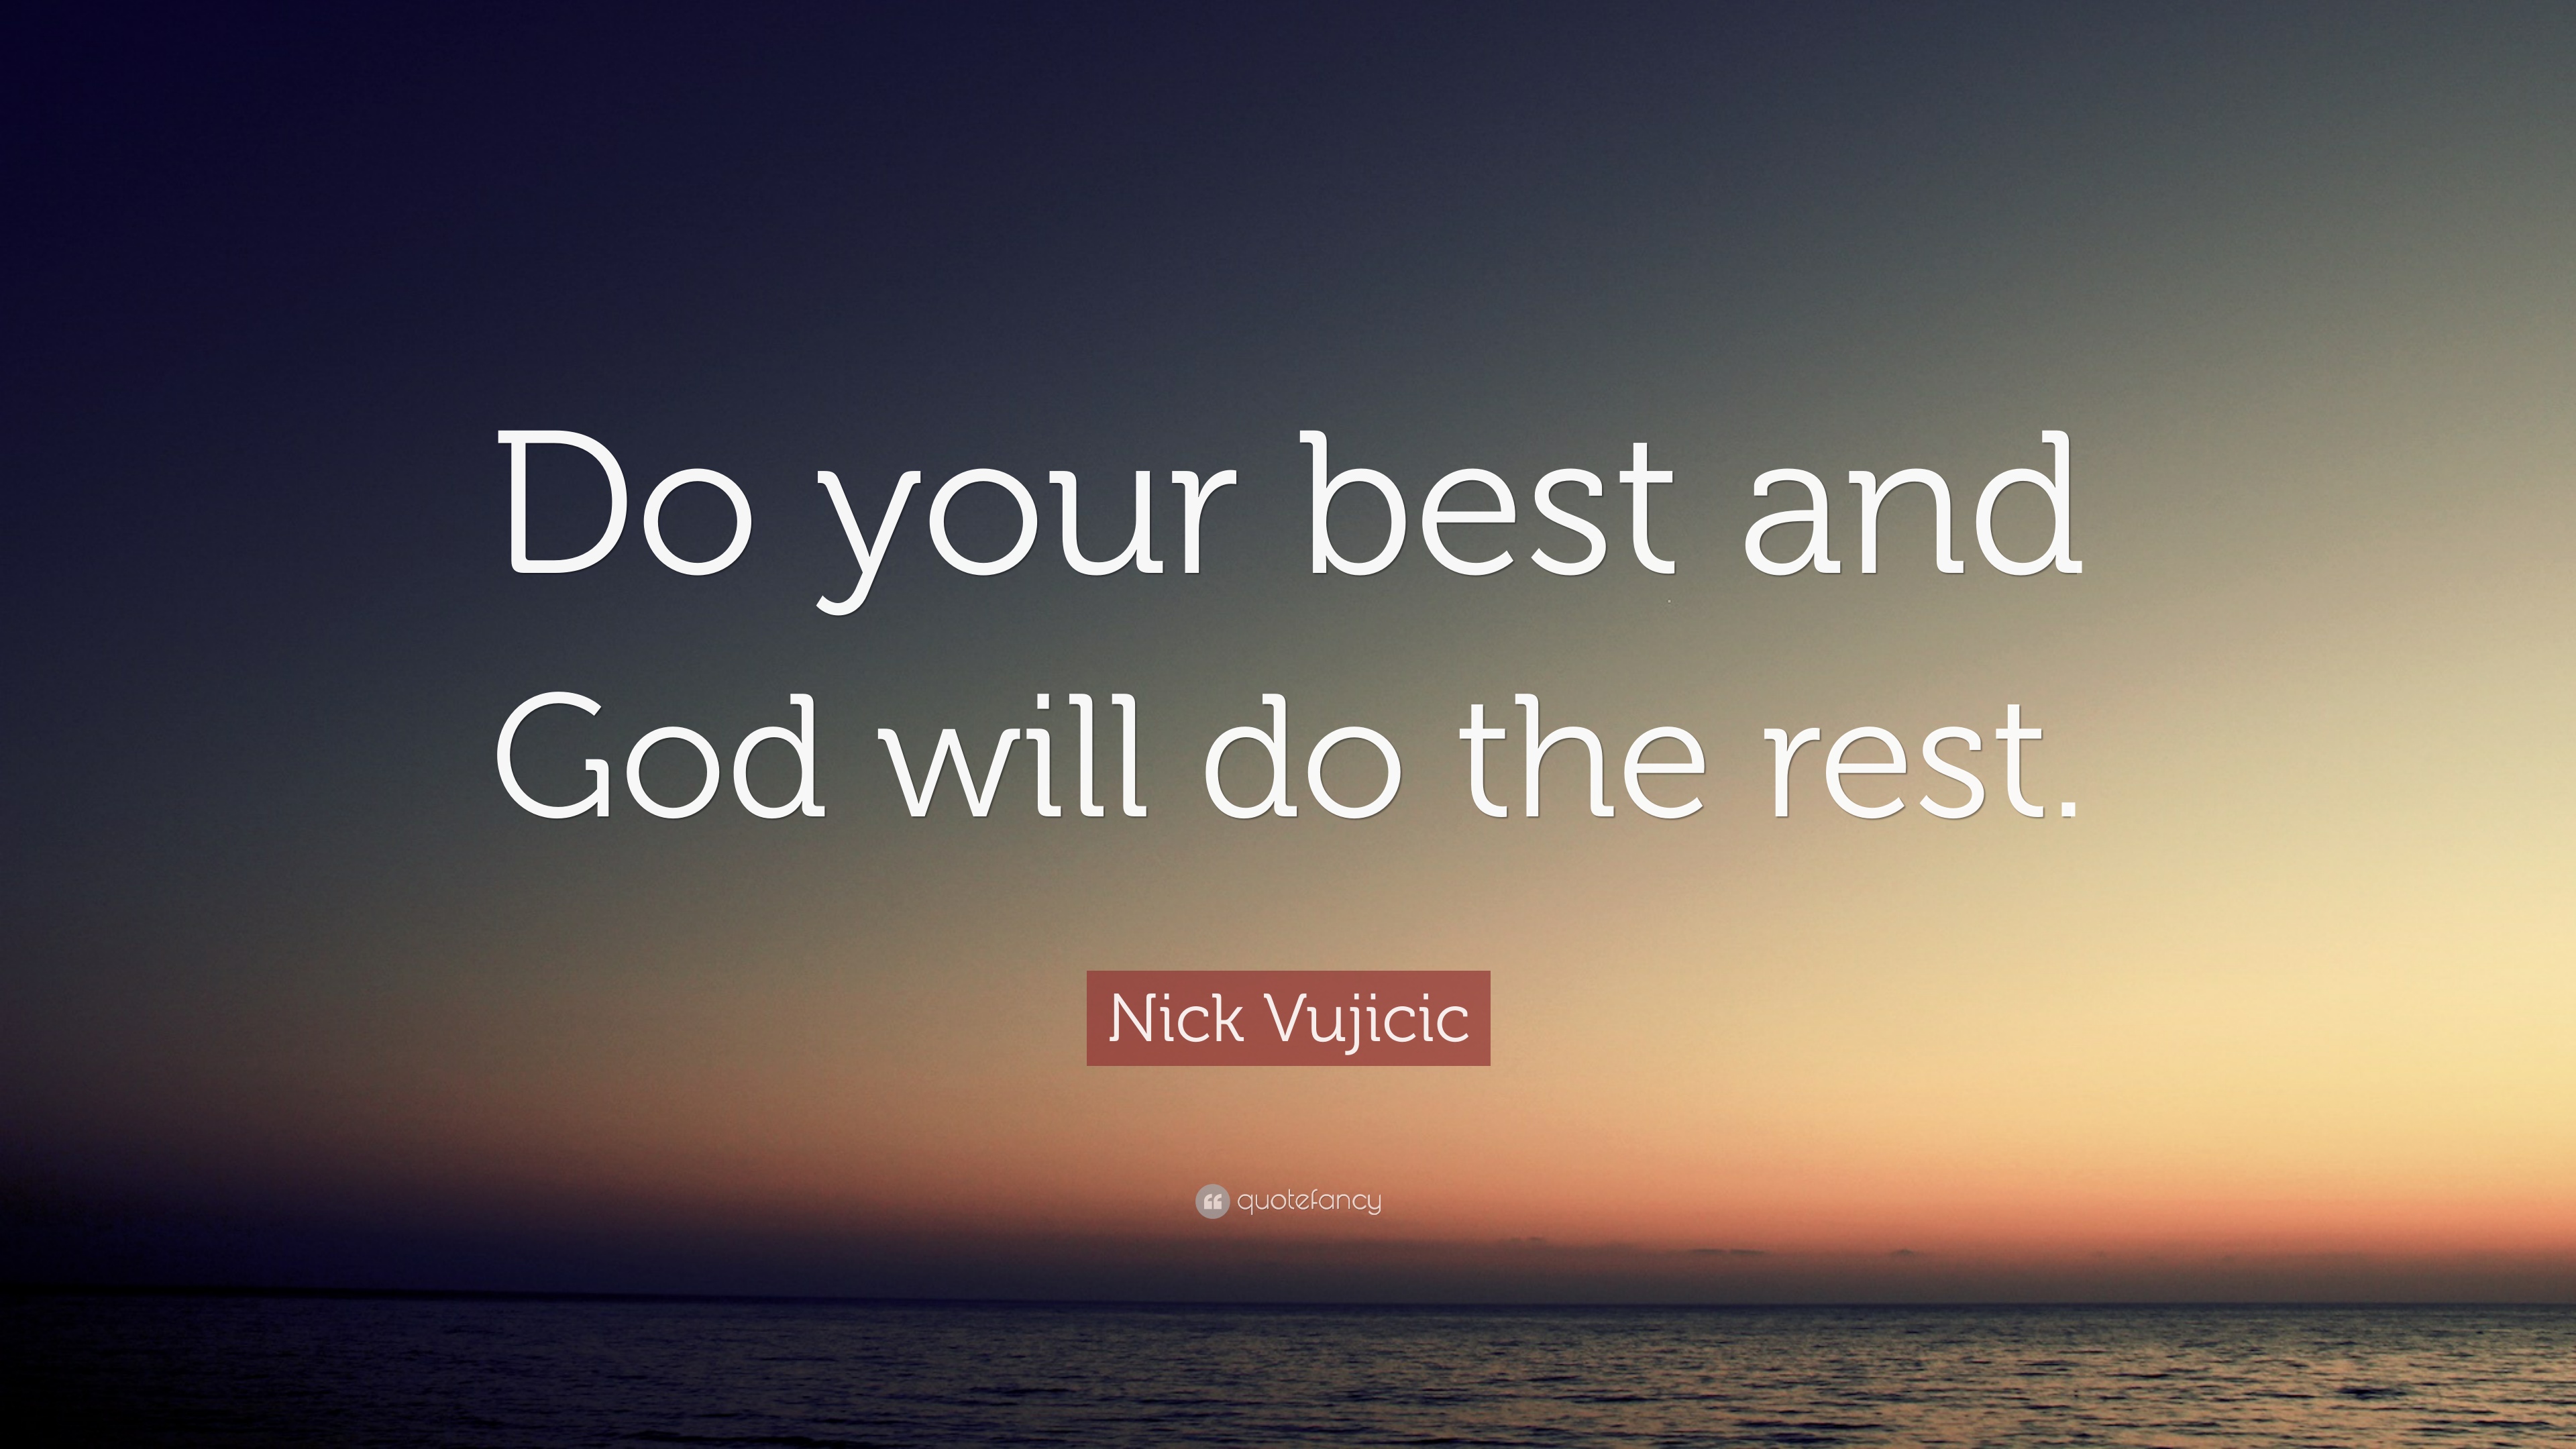 Nick Vujicic Quote: “Do your best and God will do the rest